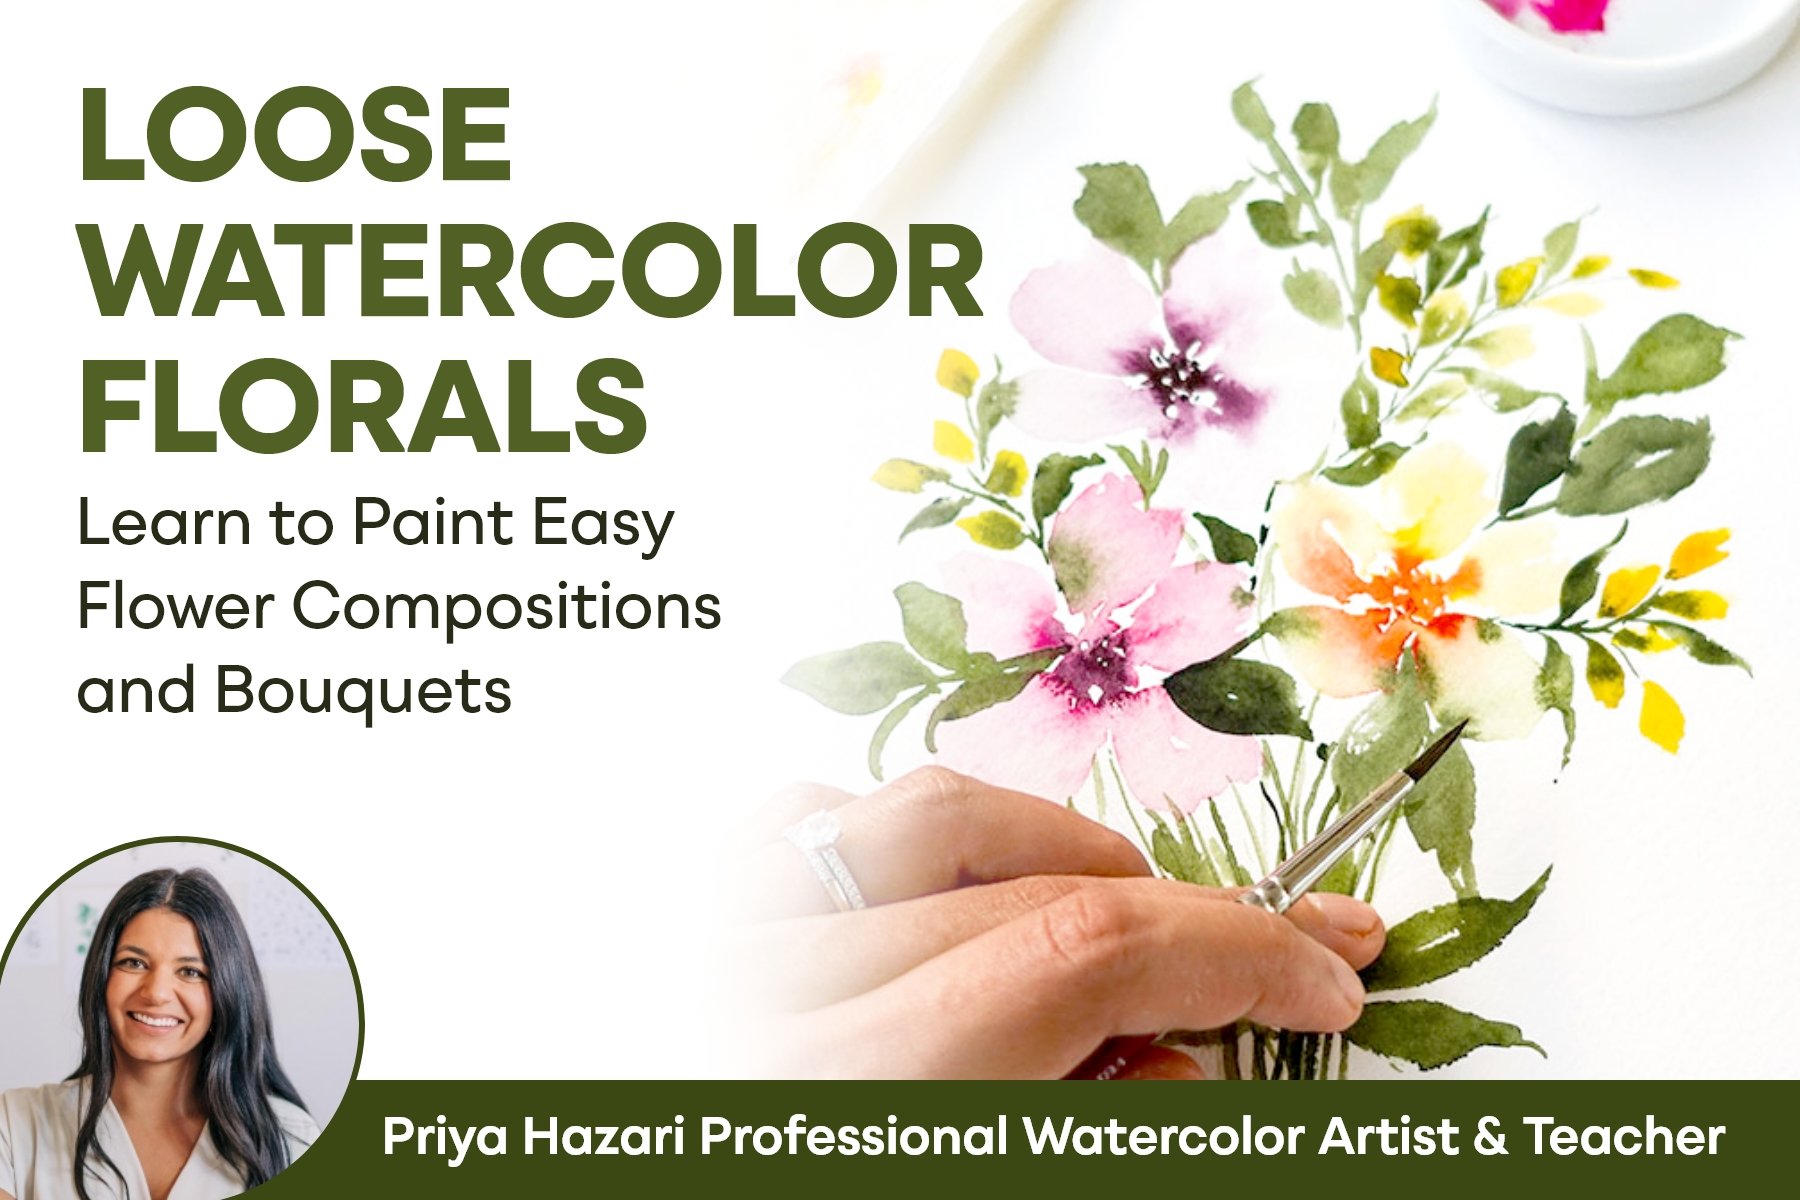 Loose Watercolor Florals: Learn To Paint Easy Flower Compositions And Bouquets